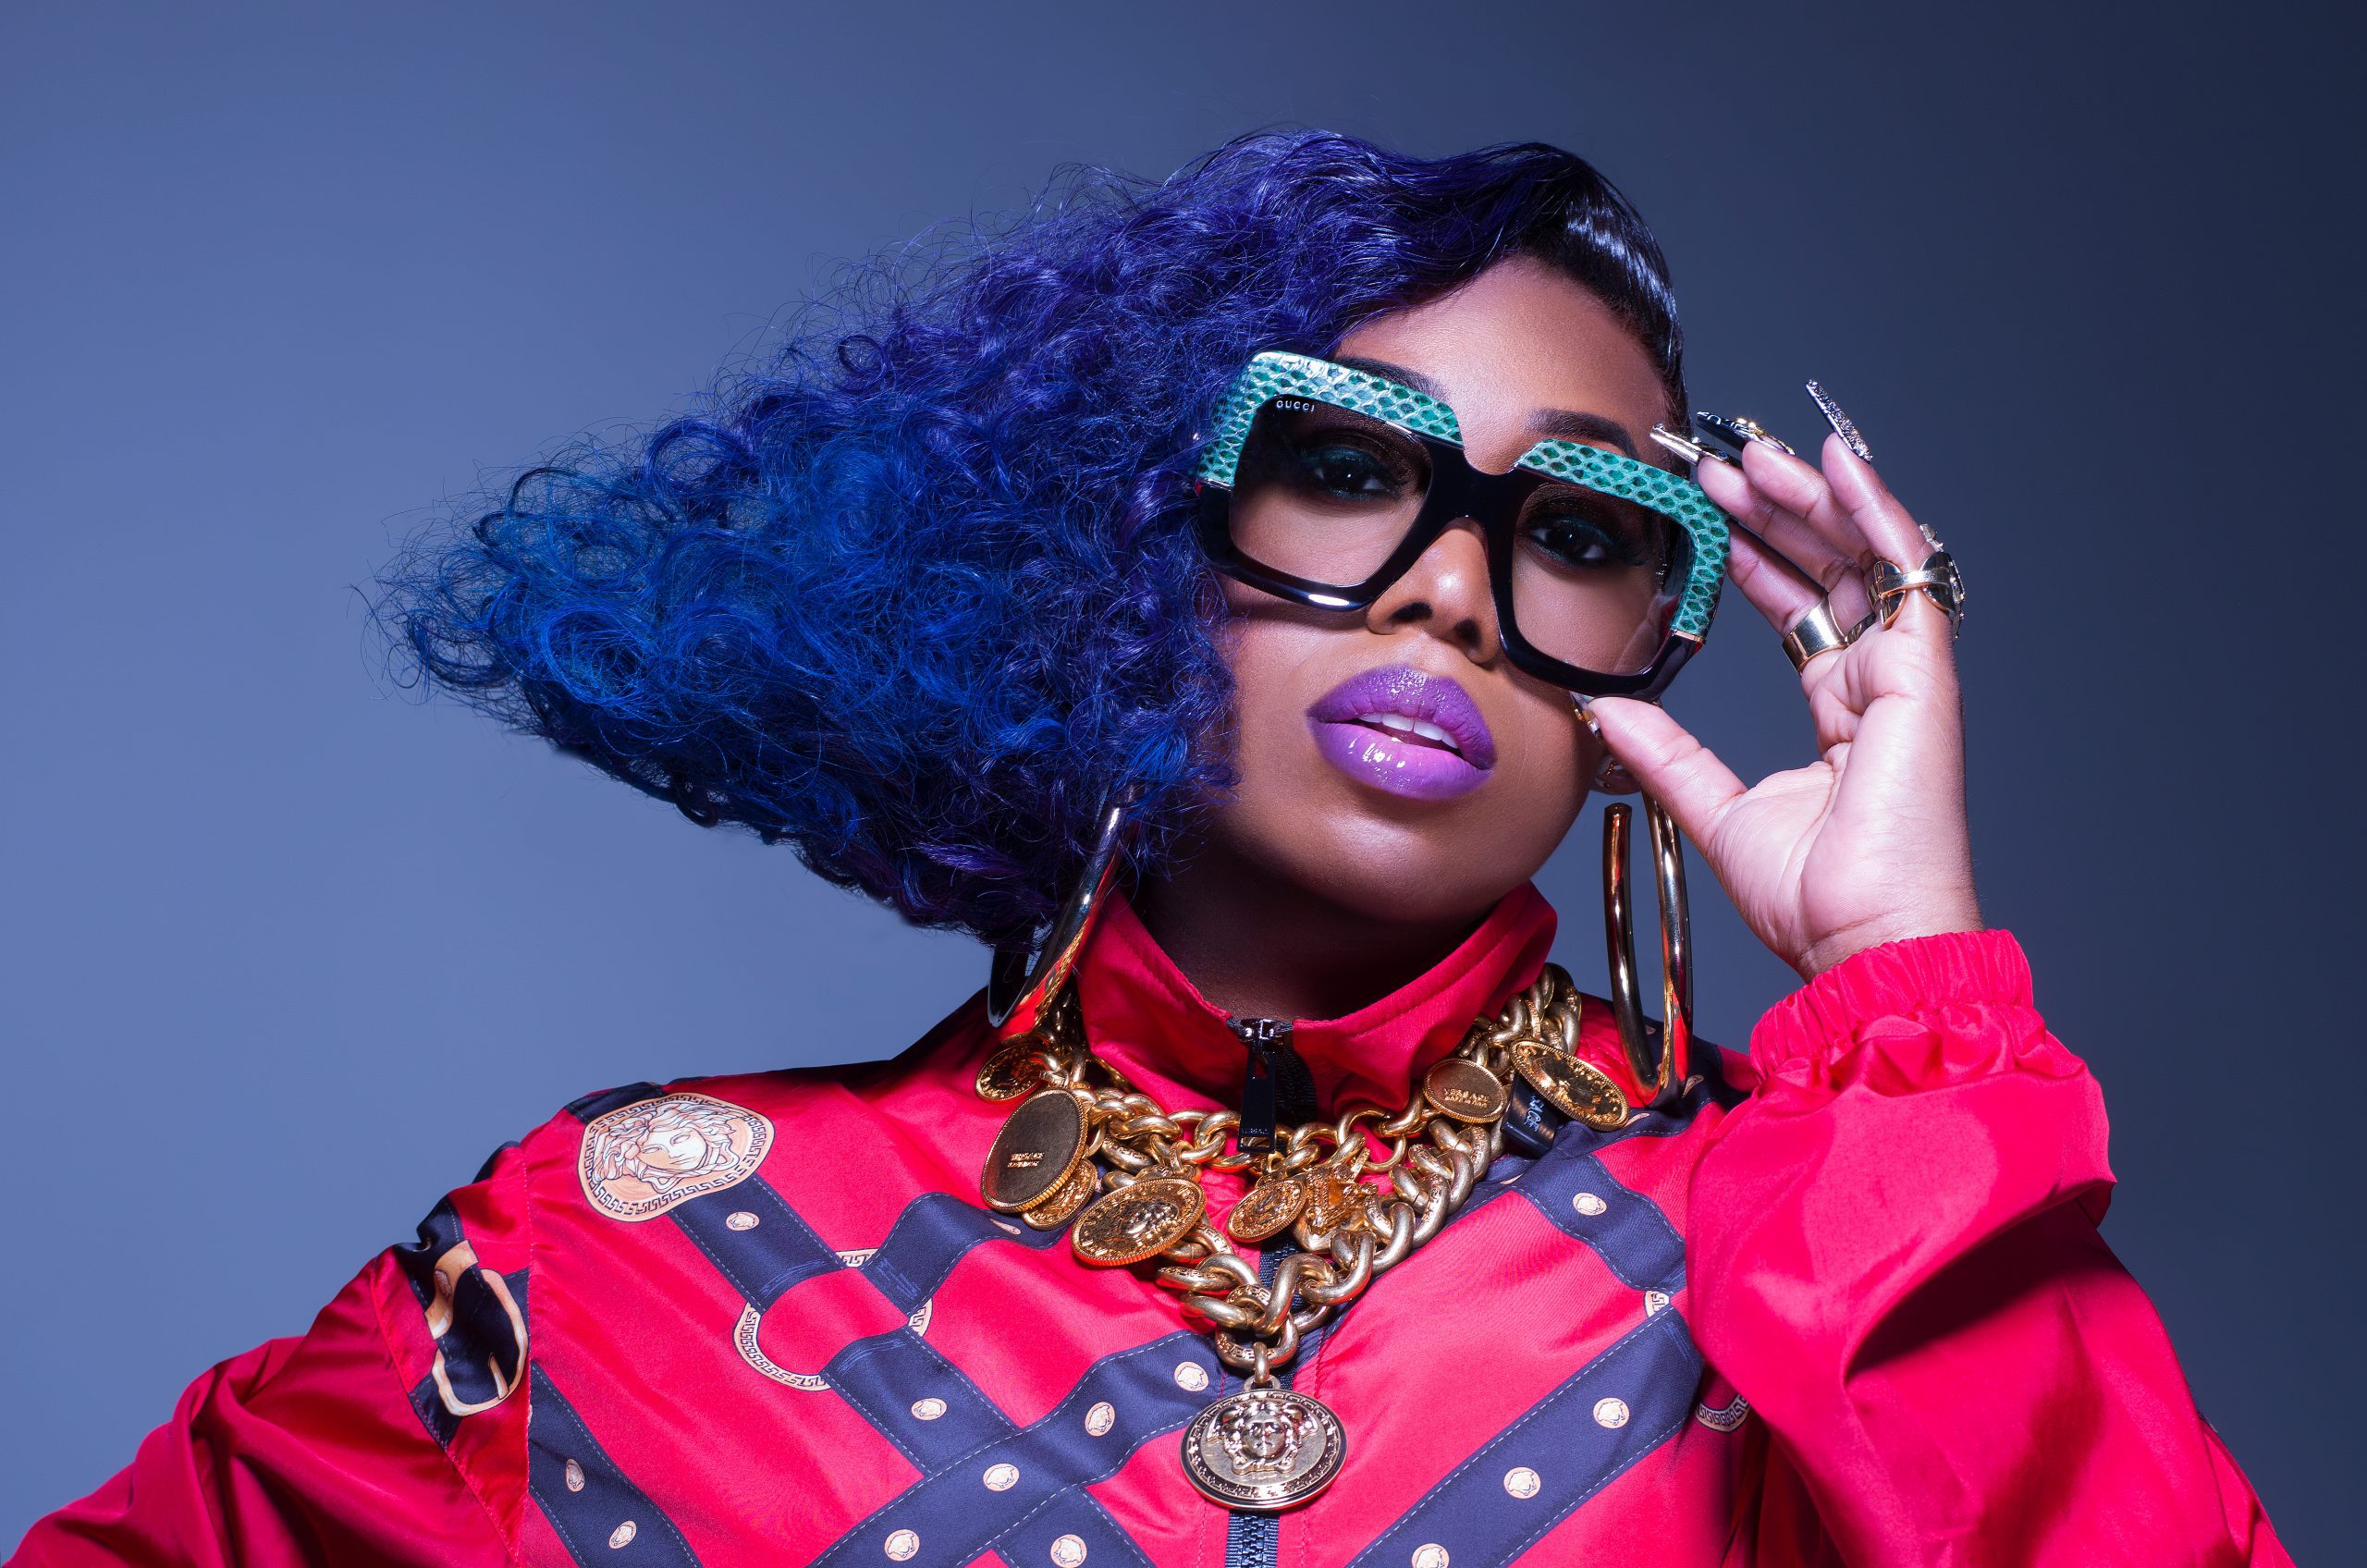 MUSIC ICON MISSY ELLIOTT TO BE HONORED WITH STAR ON THE HOLLYWOOD WALK OF  FAME - Hollywood Walk of Fame